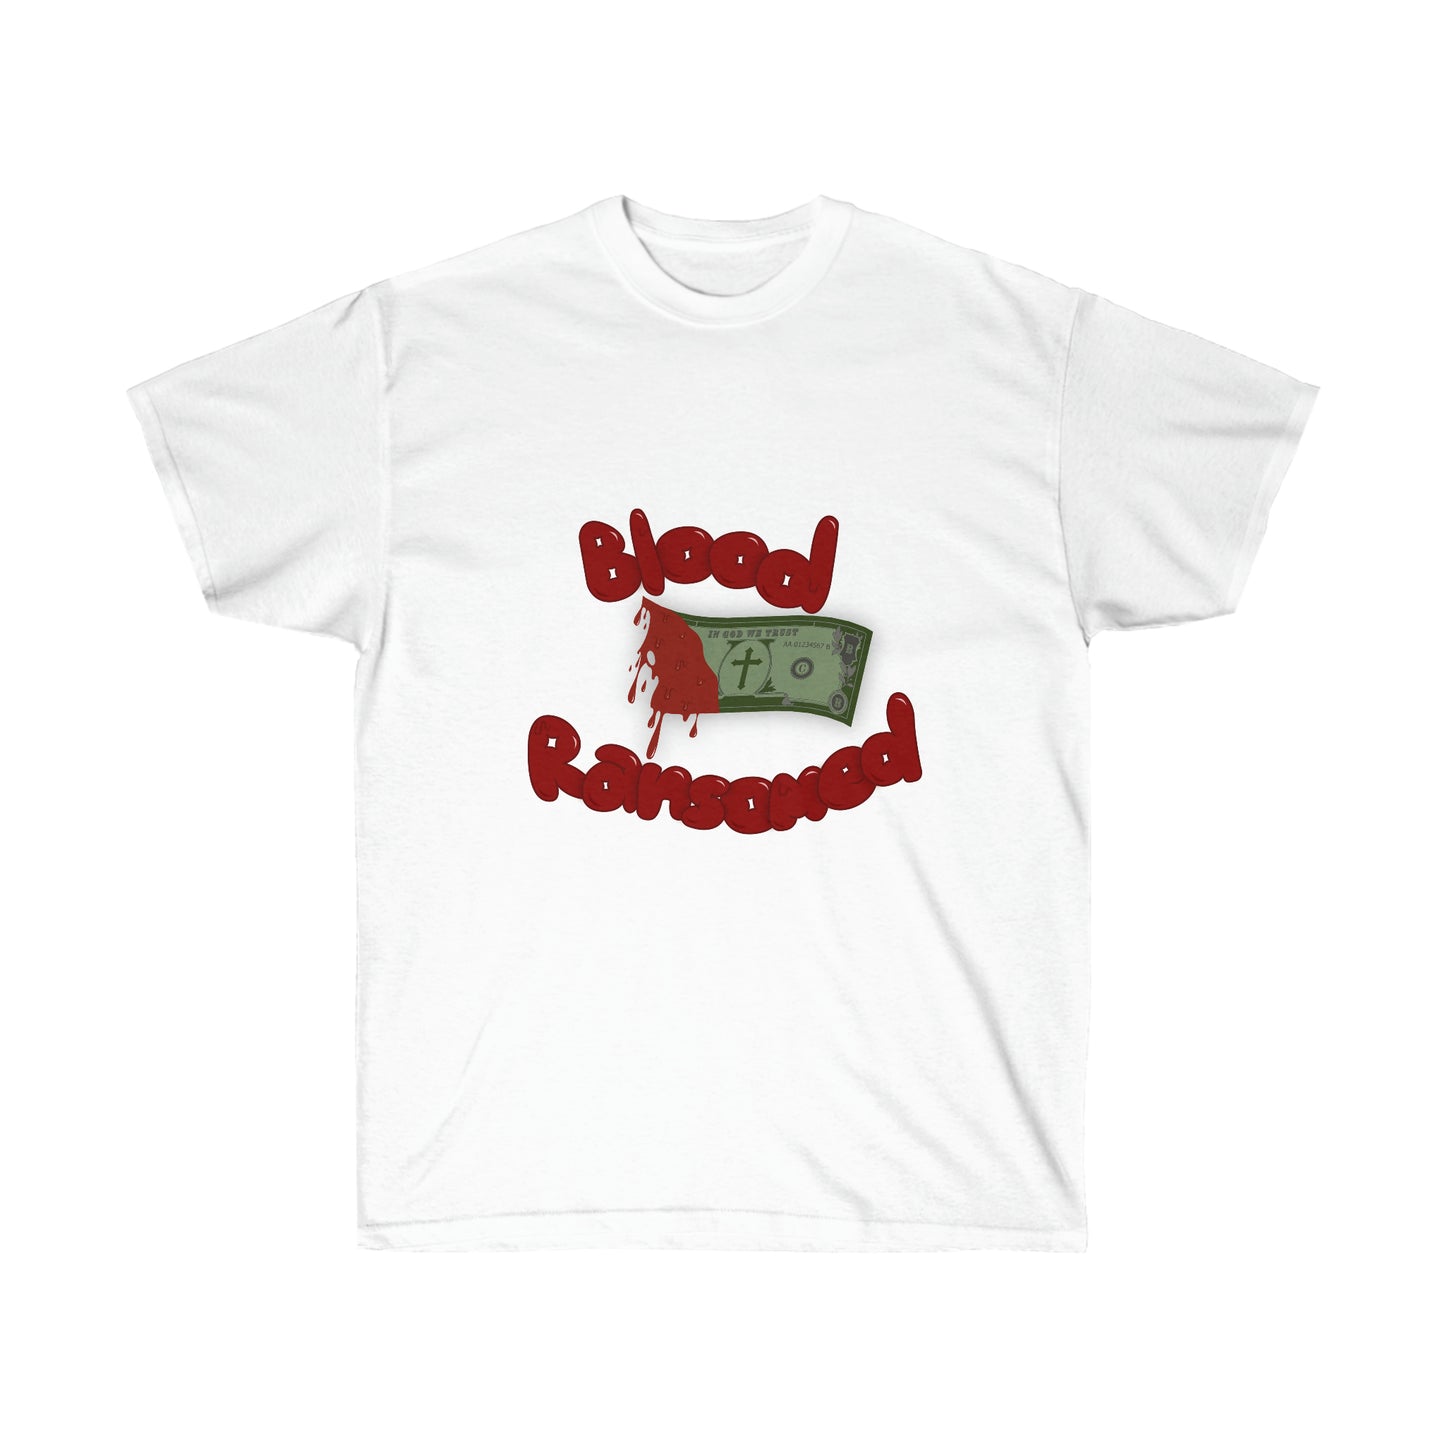 Blood Ransomed Tee